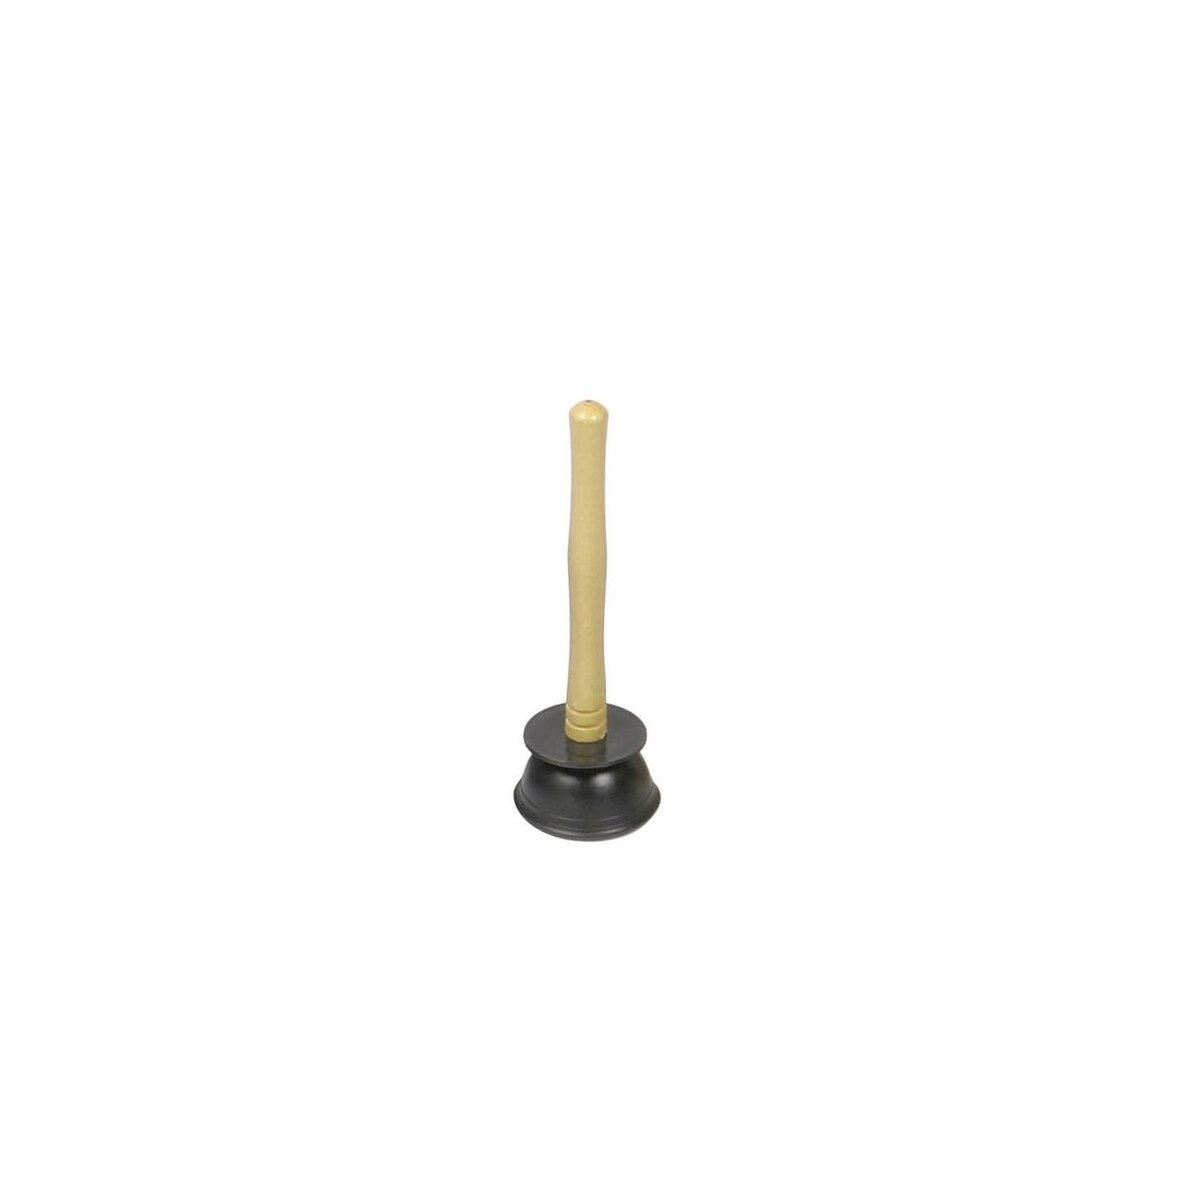 Buffalo Medium Rubber Cup Sink and Bath Plunger 100mm